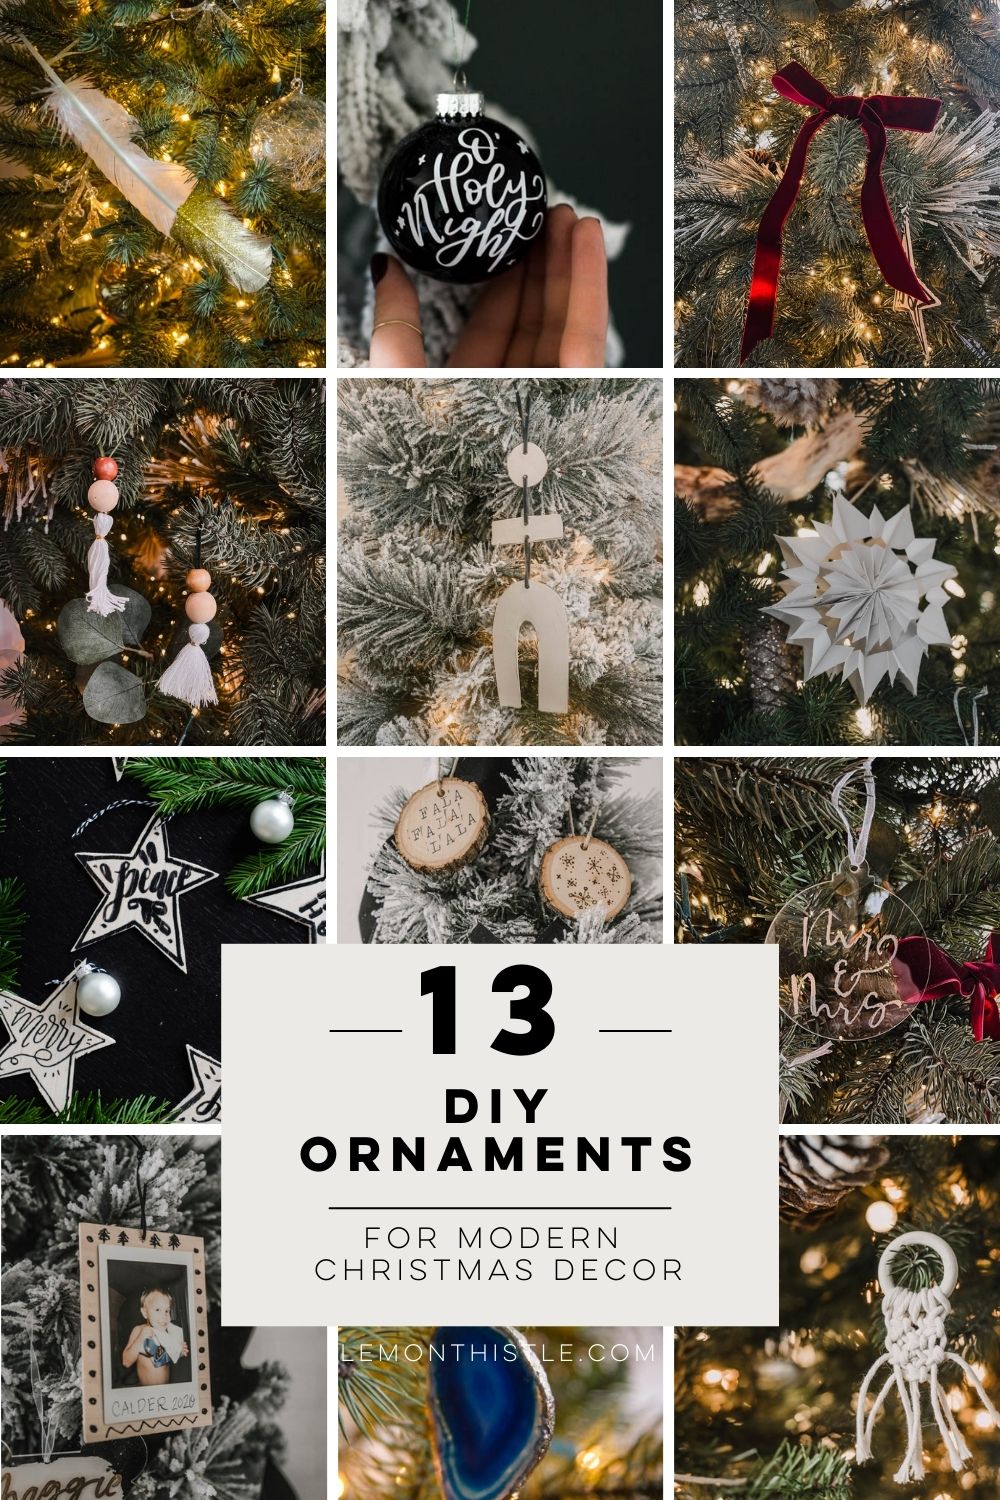 13 DIY Ornaments to make for your modern holiday decor - text over grid of images